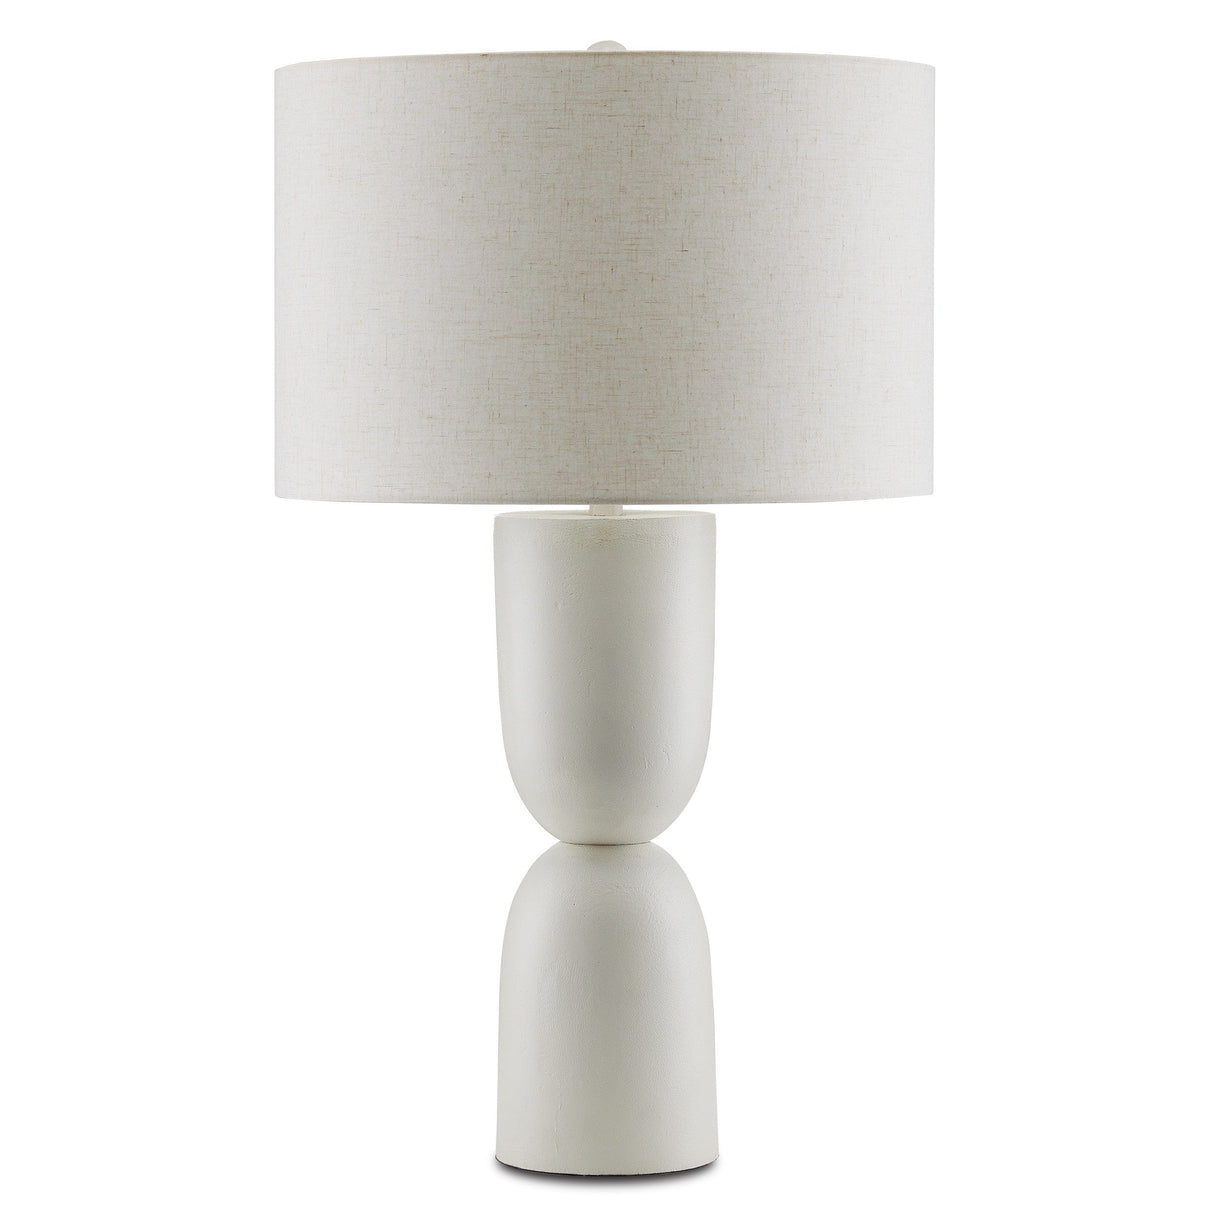 Currey and Company Linz Table Lamp Lighting currey-co-6000-0794